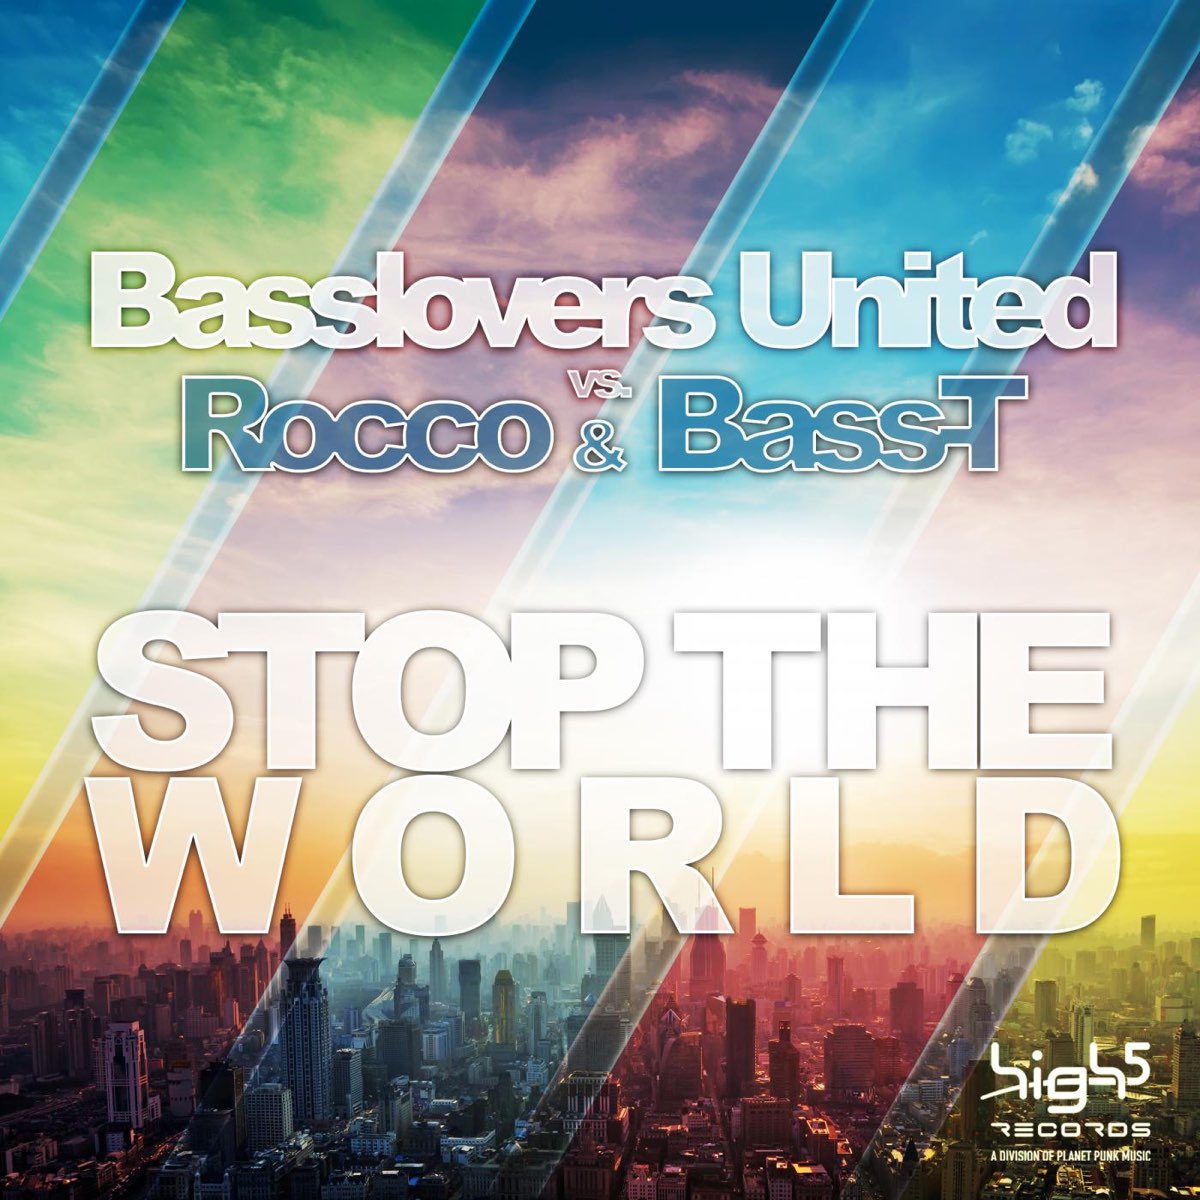 Basslovers United - feel it in my Soul. Rocco bass t